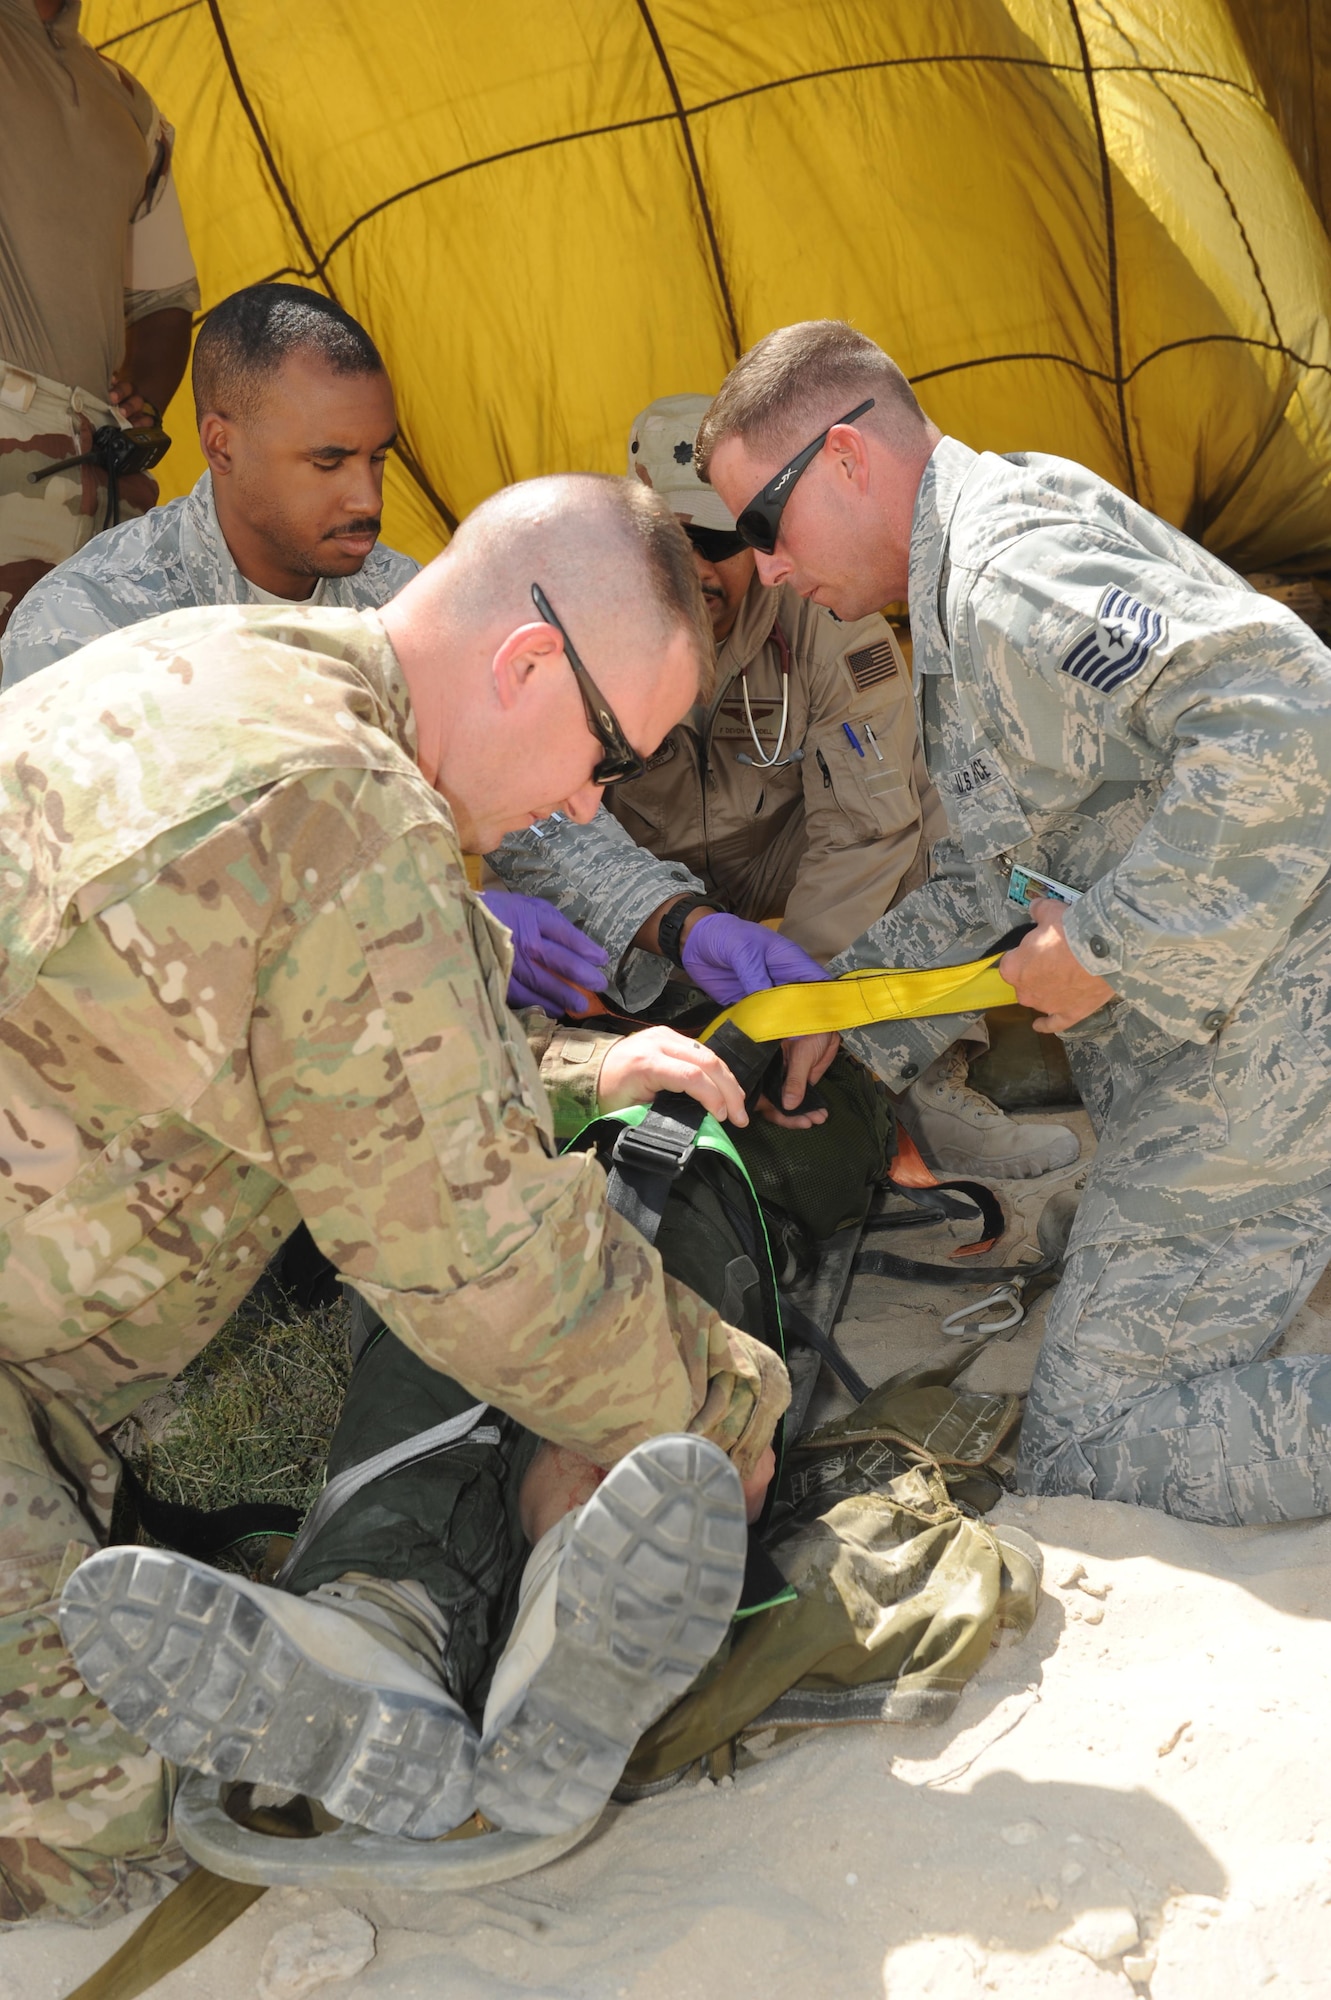 Members of the 380th Expeditionary Medical Group medical operations flight prepare a French pilot for transport during a joint crash exercise at an undisclosed location in Southwest Asia, May 16, 2017. Coalition forces responded to exercise locations at two different sites, testing how well partner first responders would work together in the event of an accident or incident. (U.S. Air Force photo by Staff Sgt. Marjorie A. Bowlden)